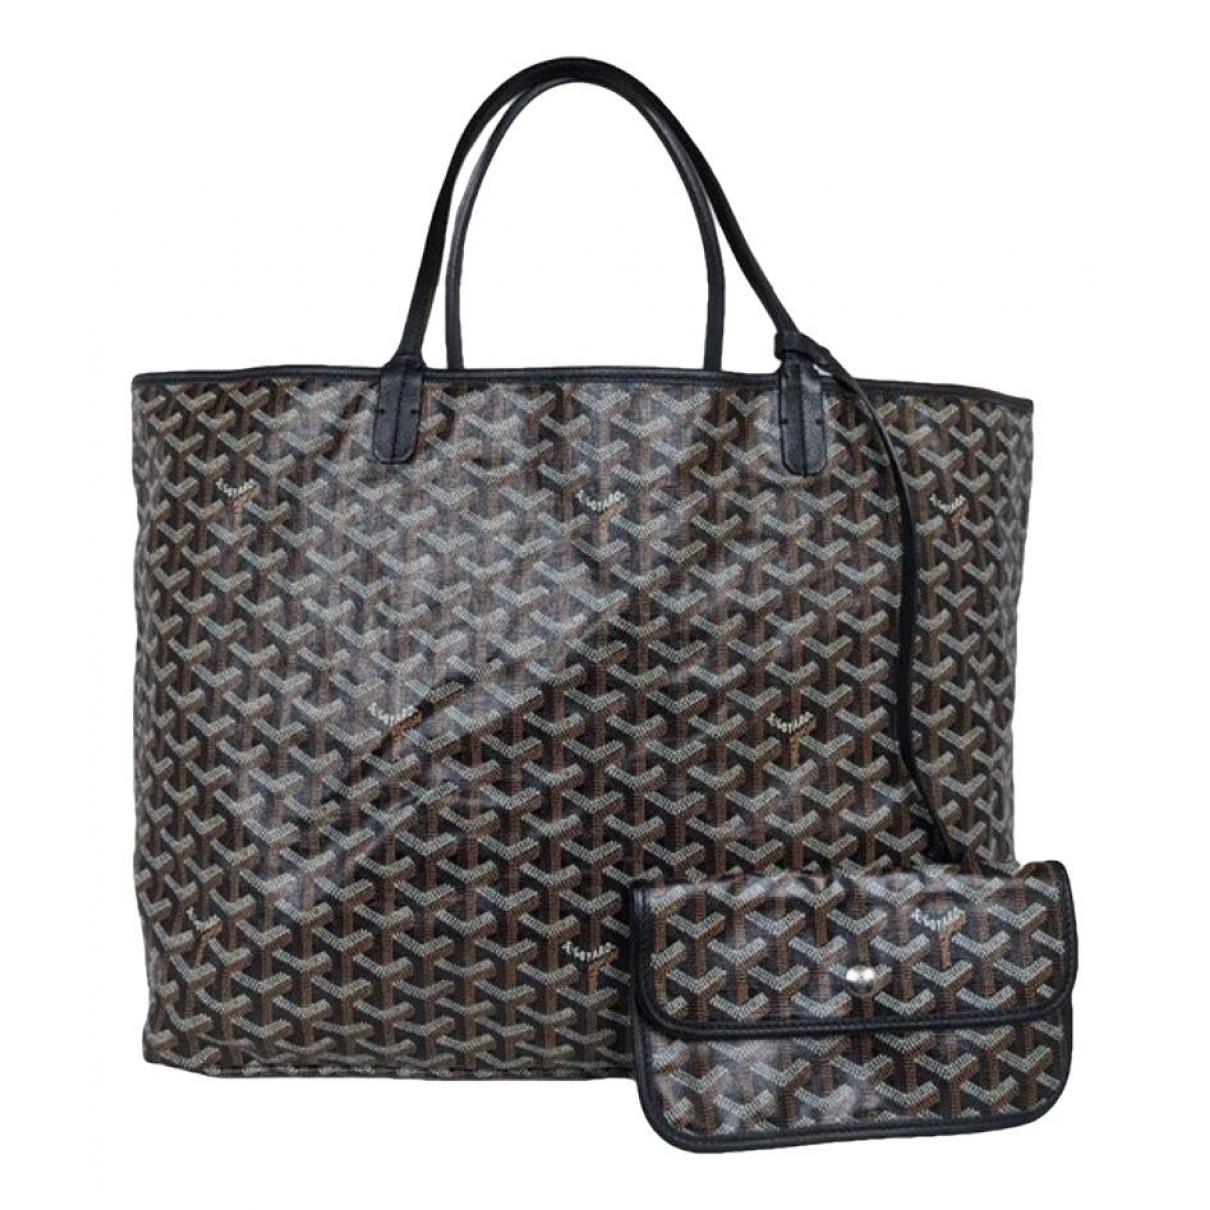 Goyard Saint Louis PM Tote - New in Dust Bag - The Consignment Cafe